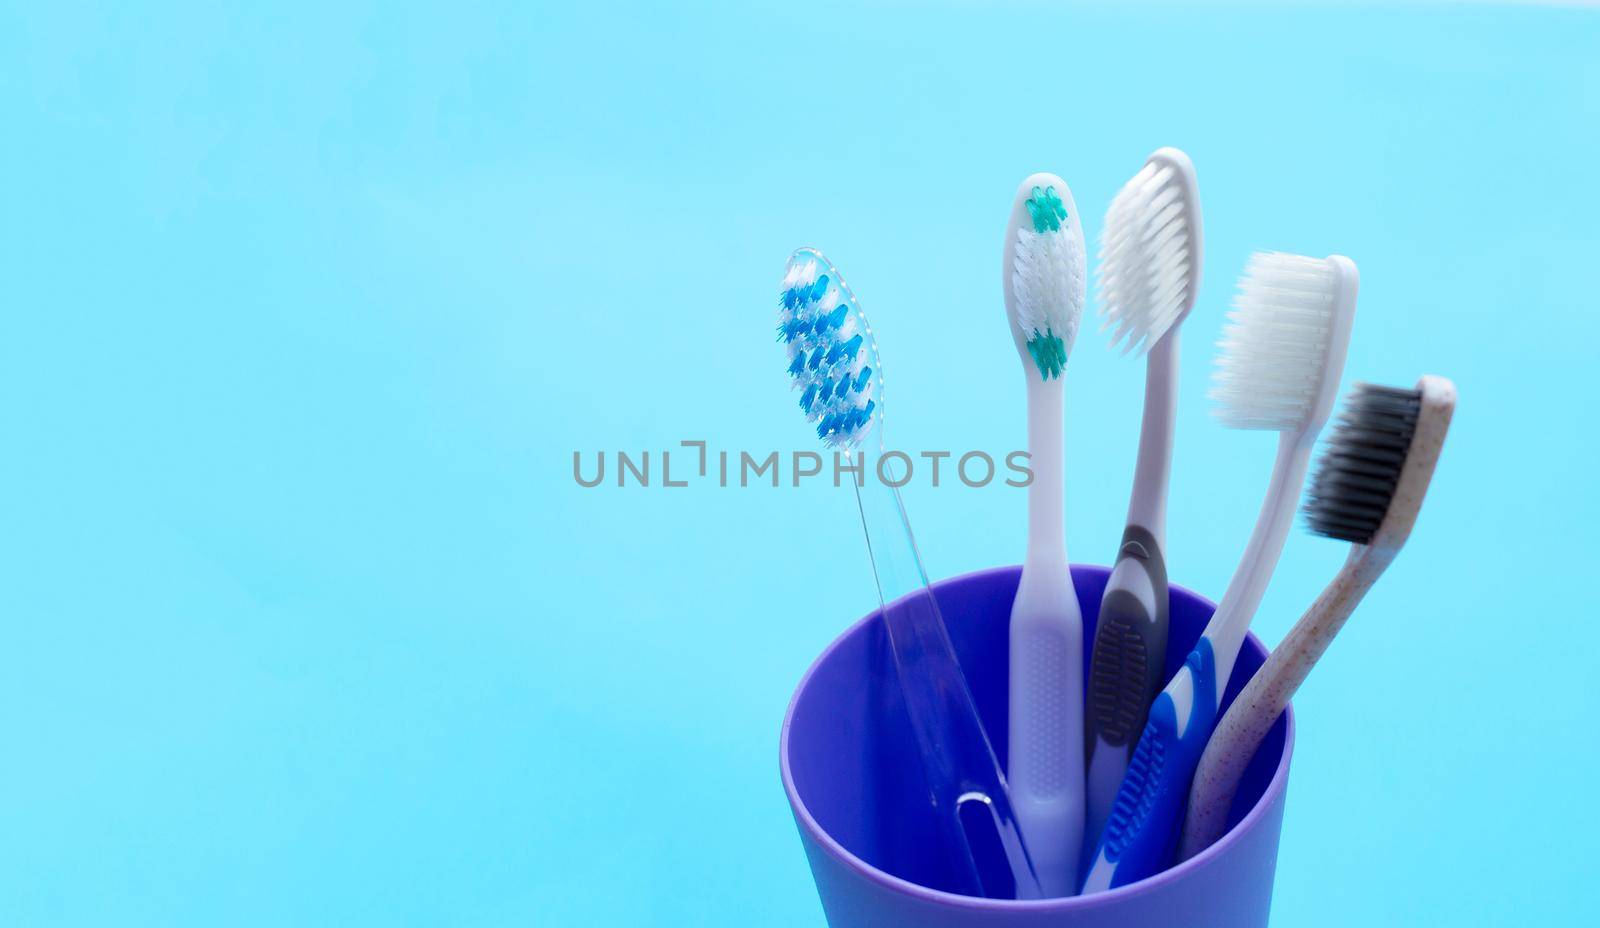 Toothbrushes in plastic glass on blue background. Copy space by Bowonpat